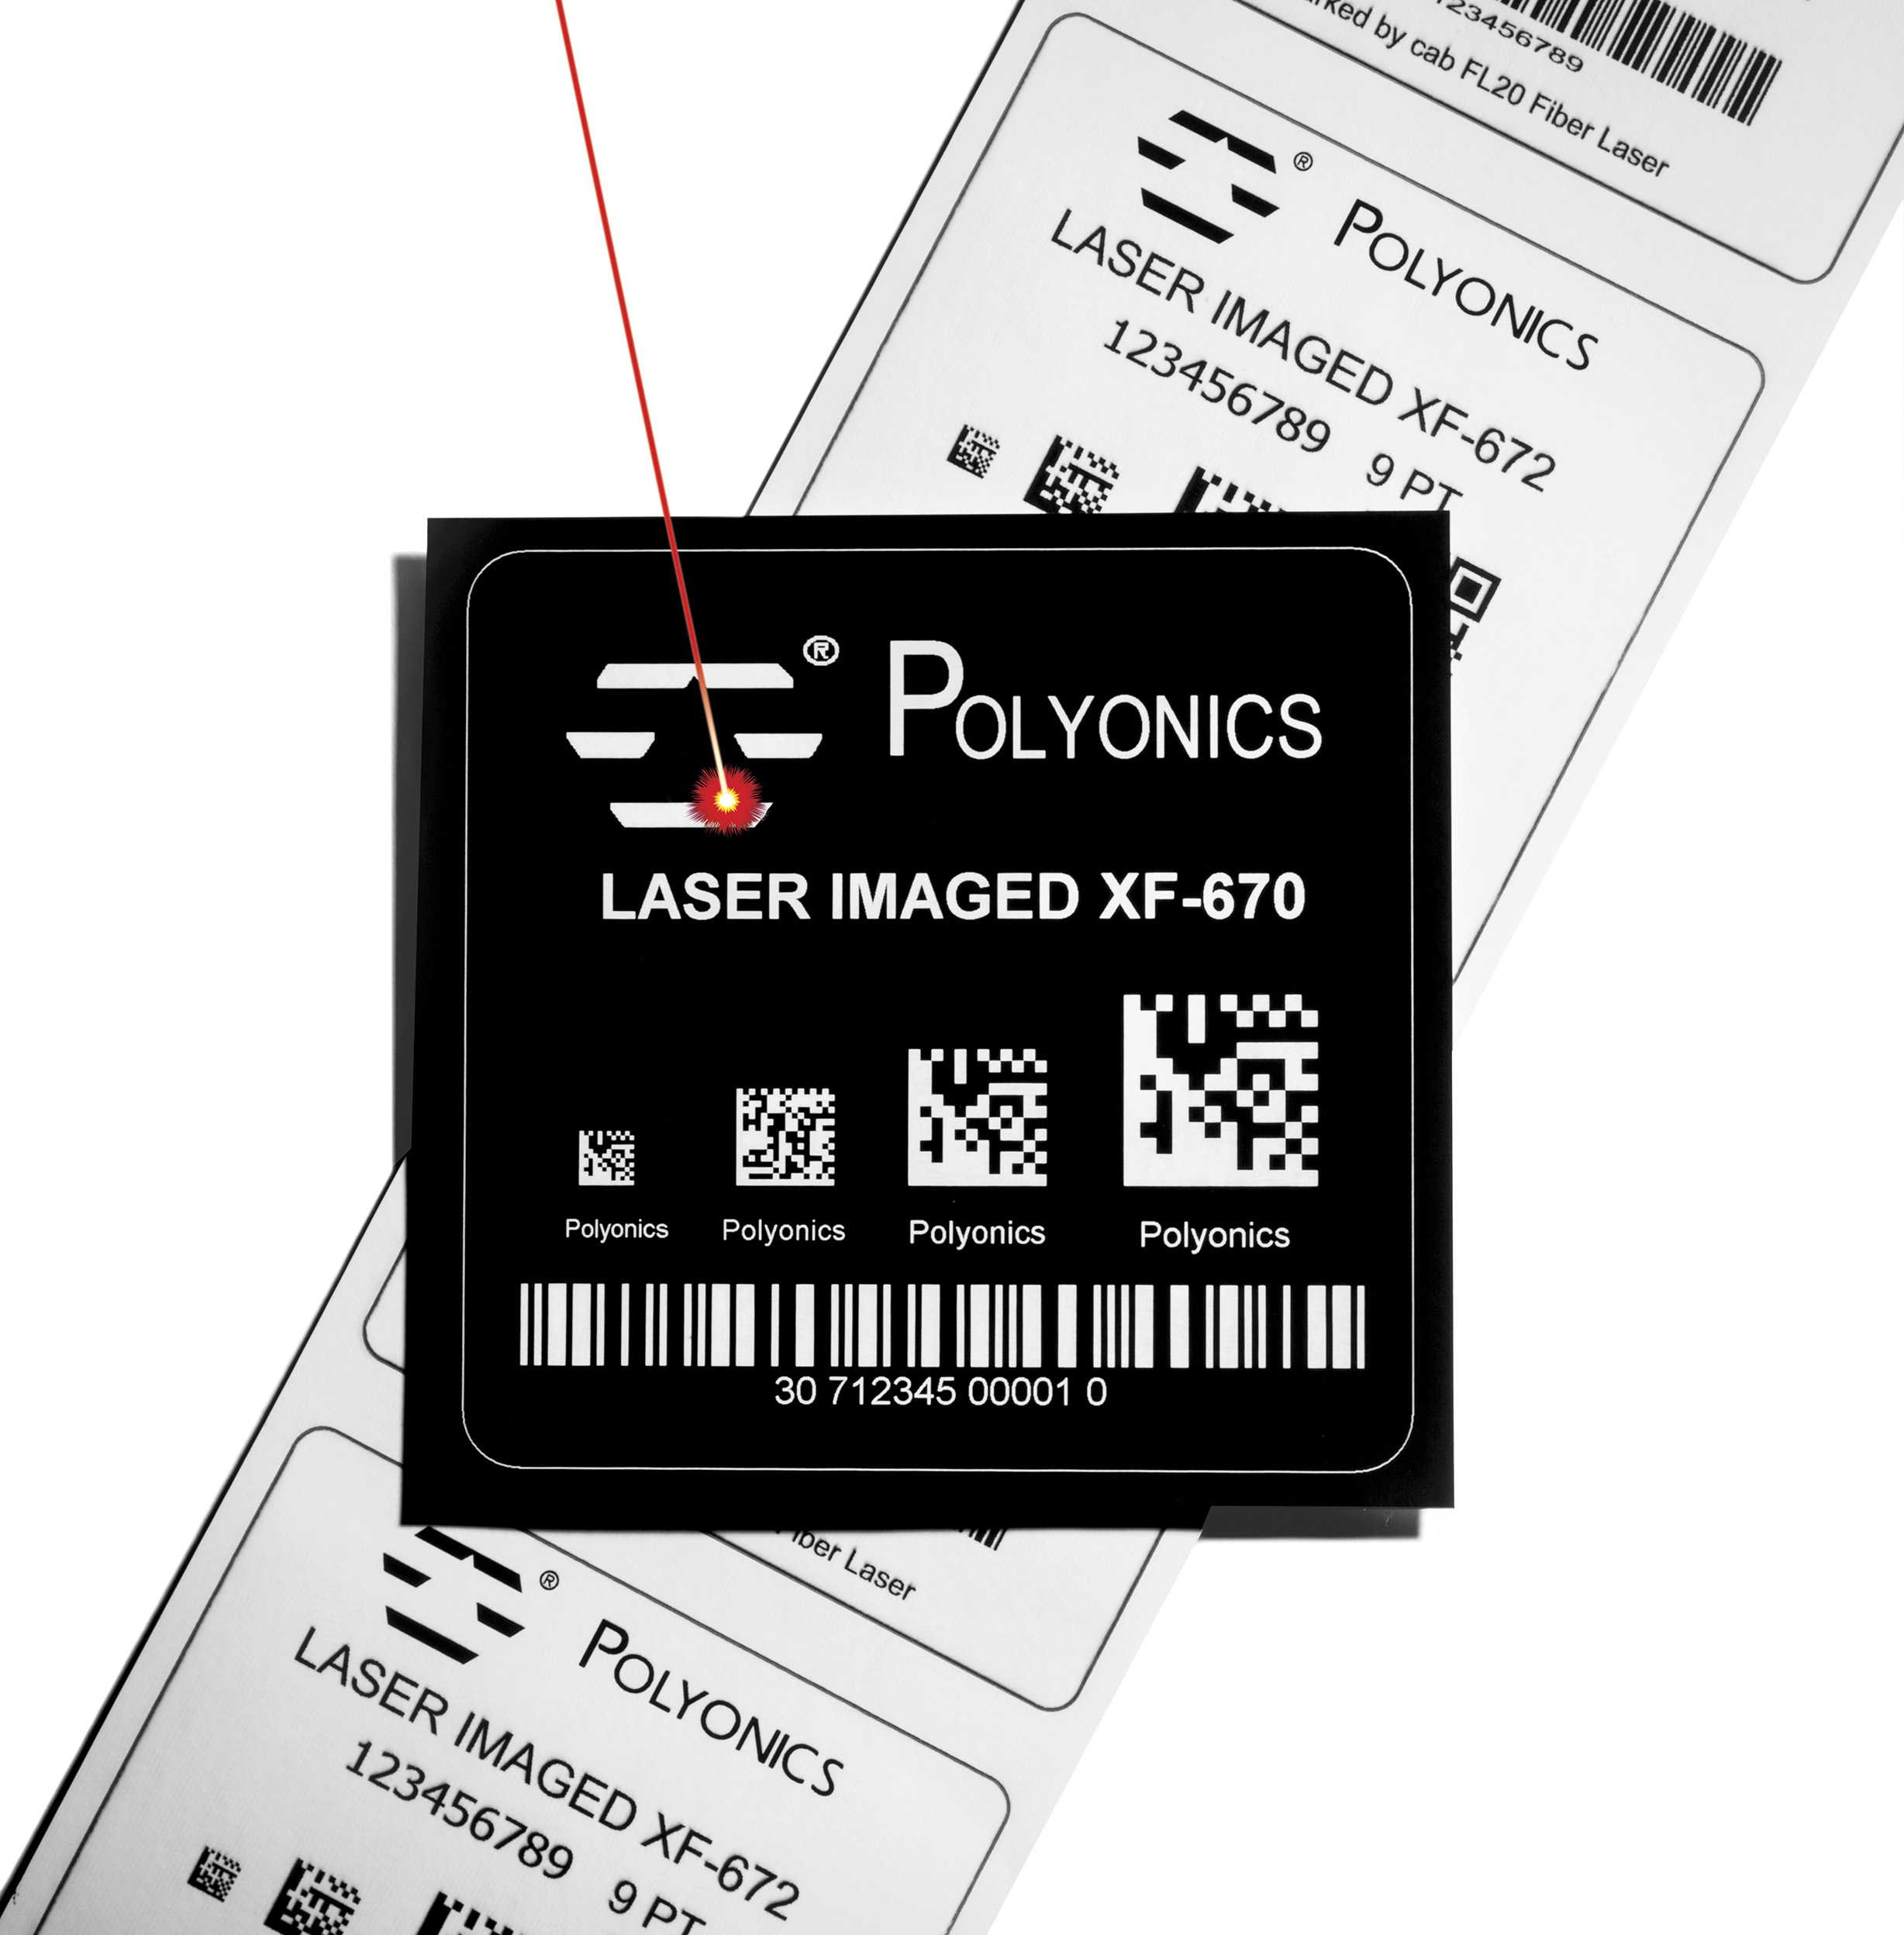 Polyonics black and white laser markable polyimide label materials